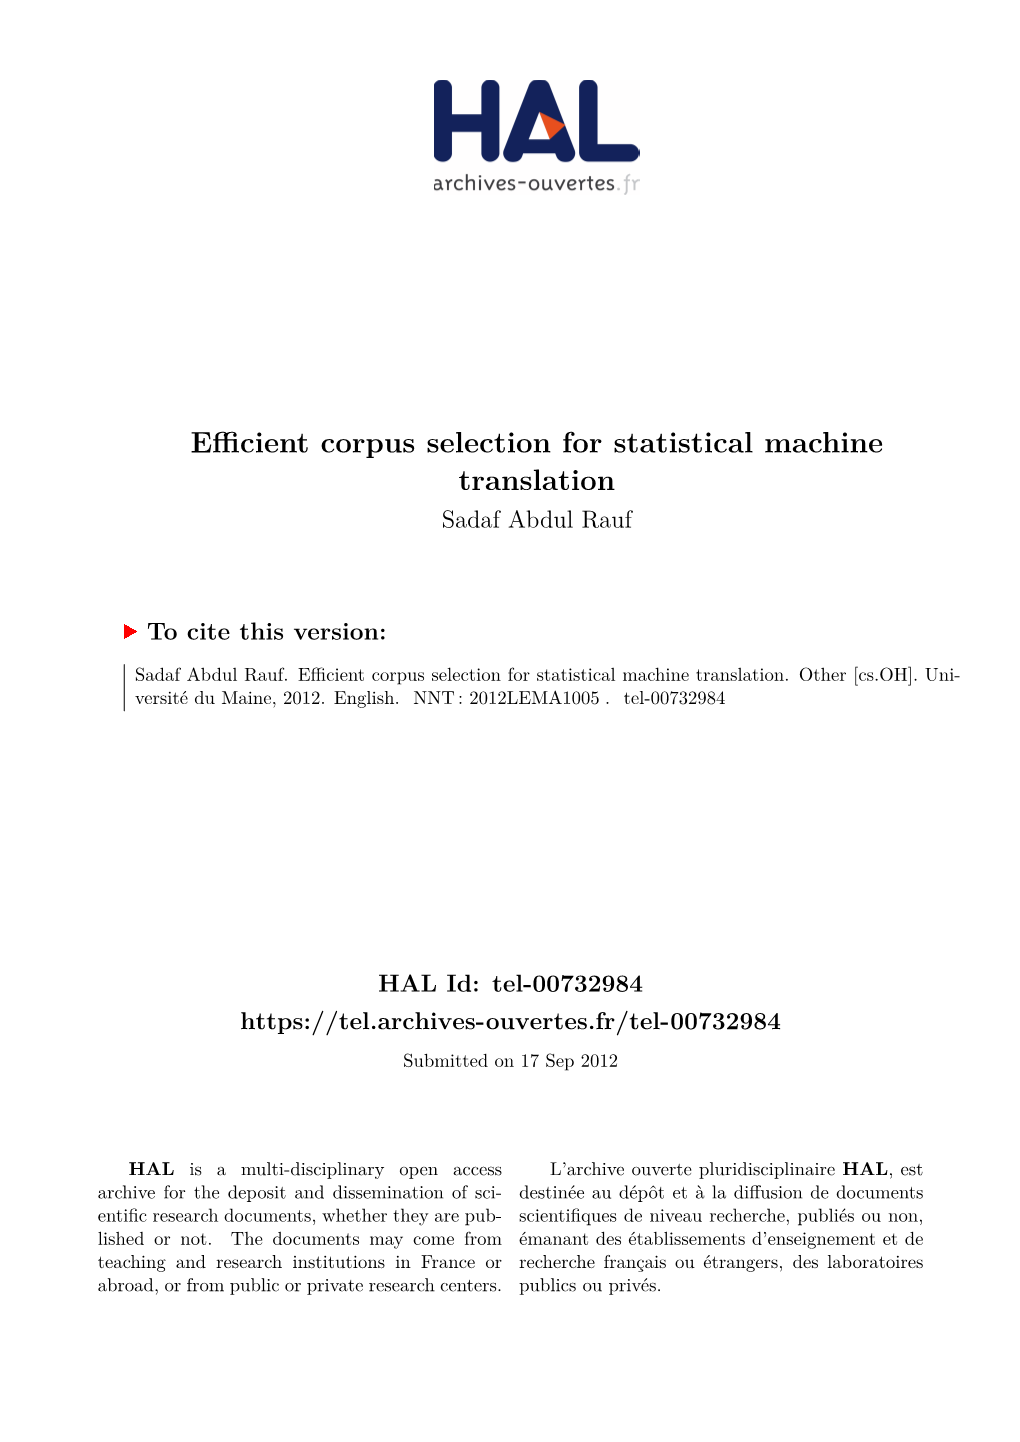 Efficient Corpus Selection for Statistical Machine Translation